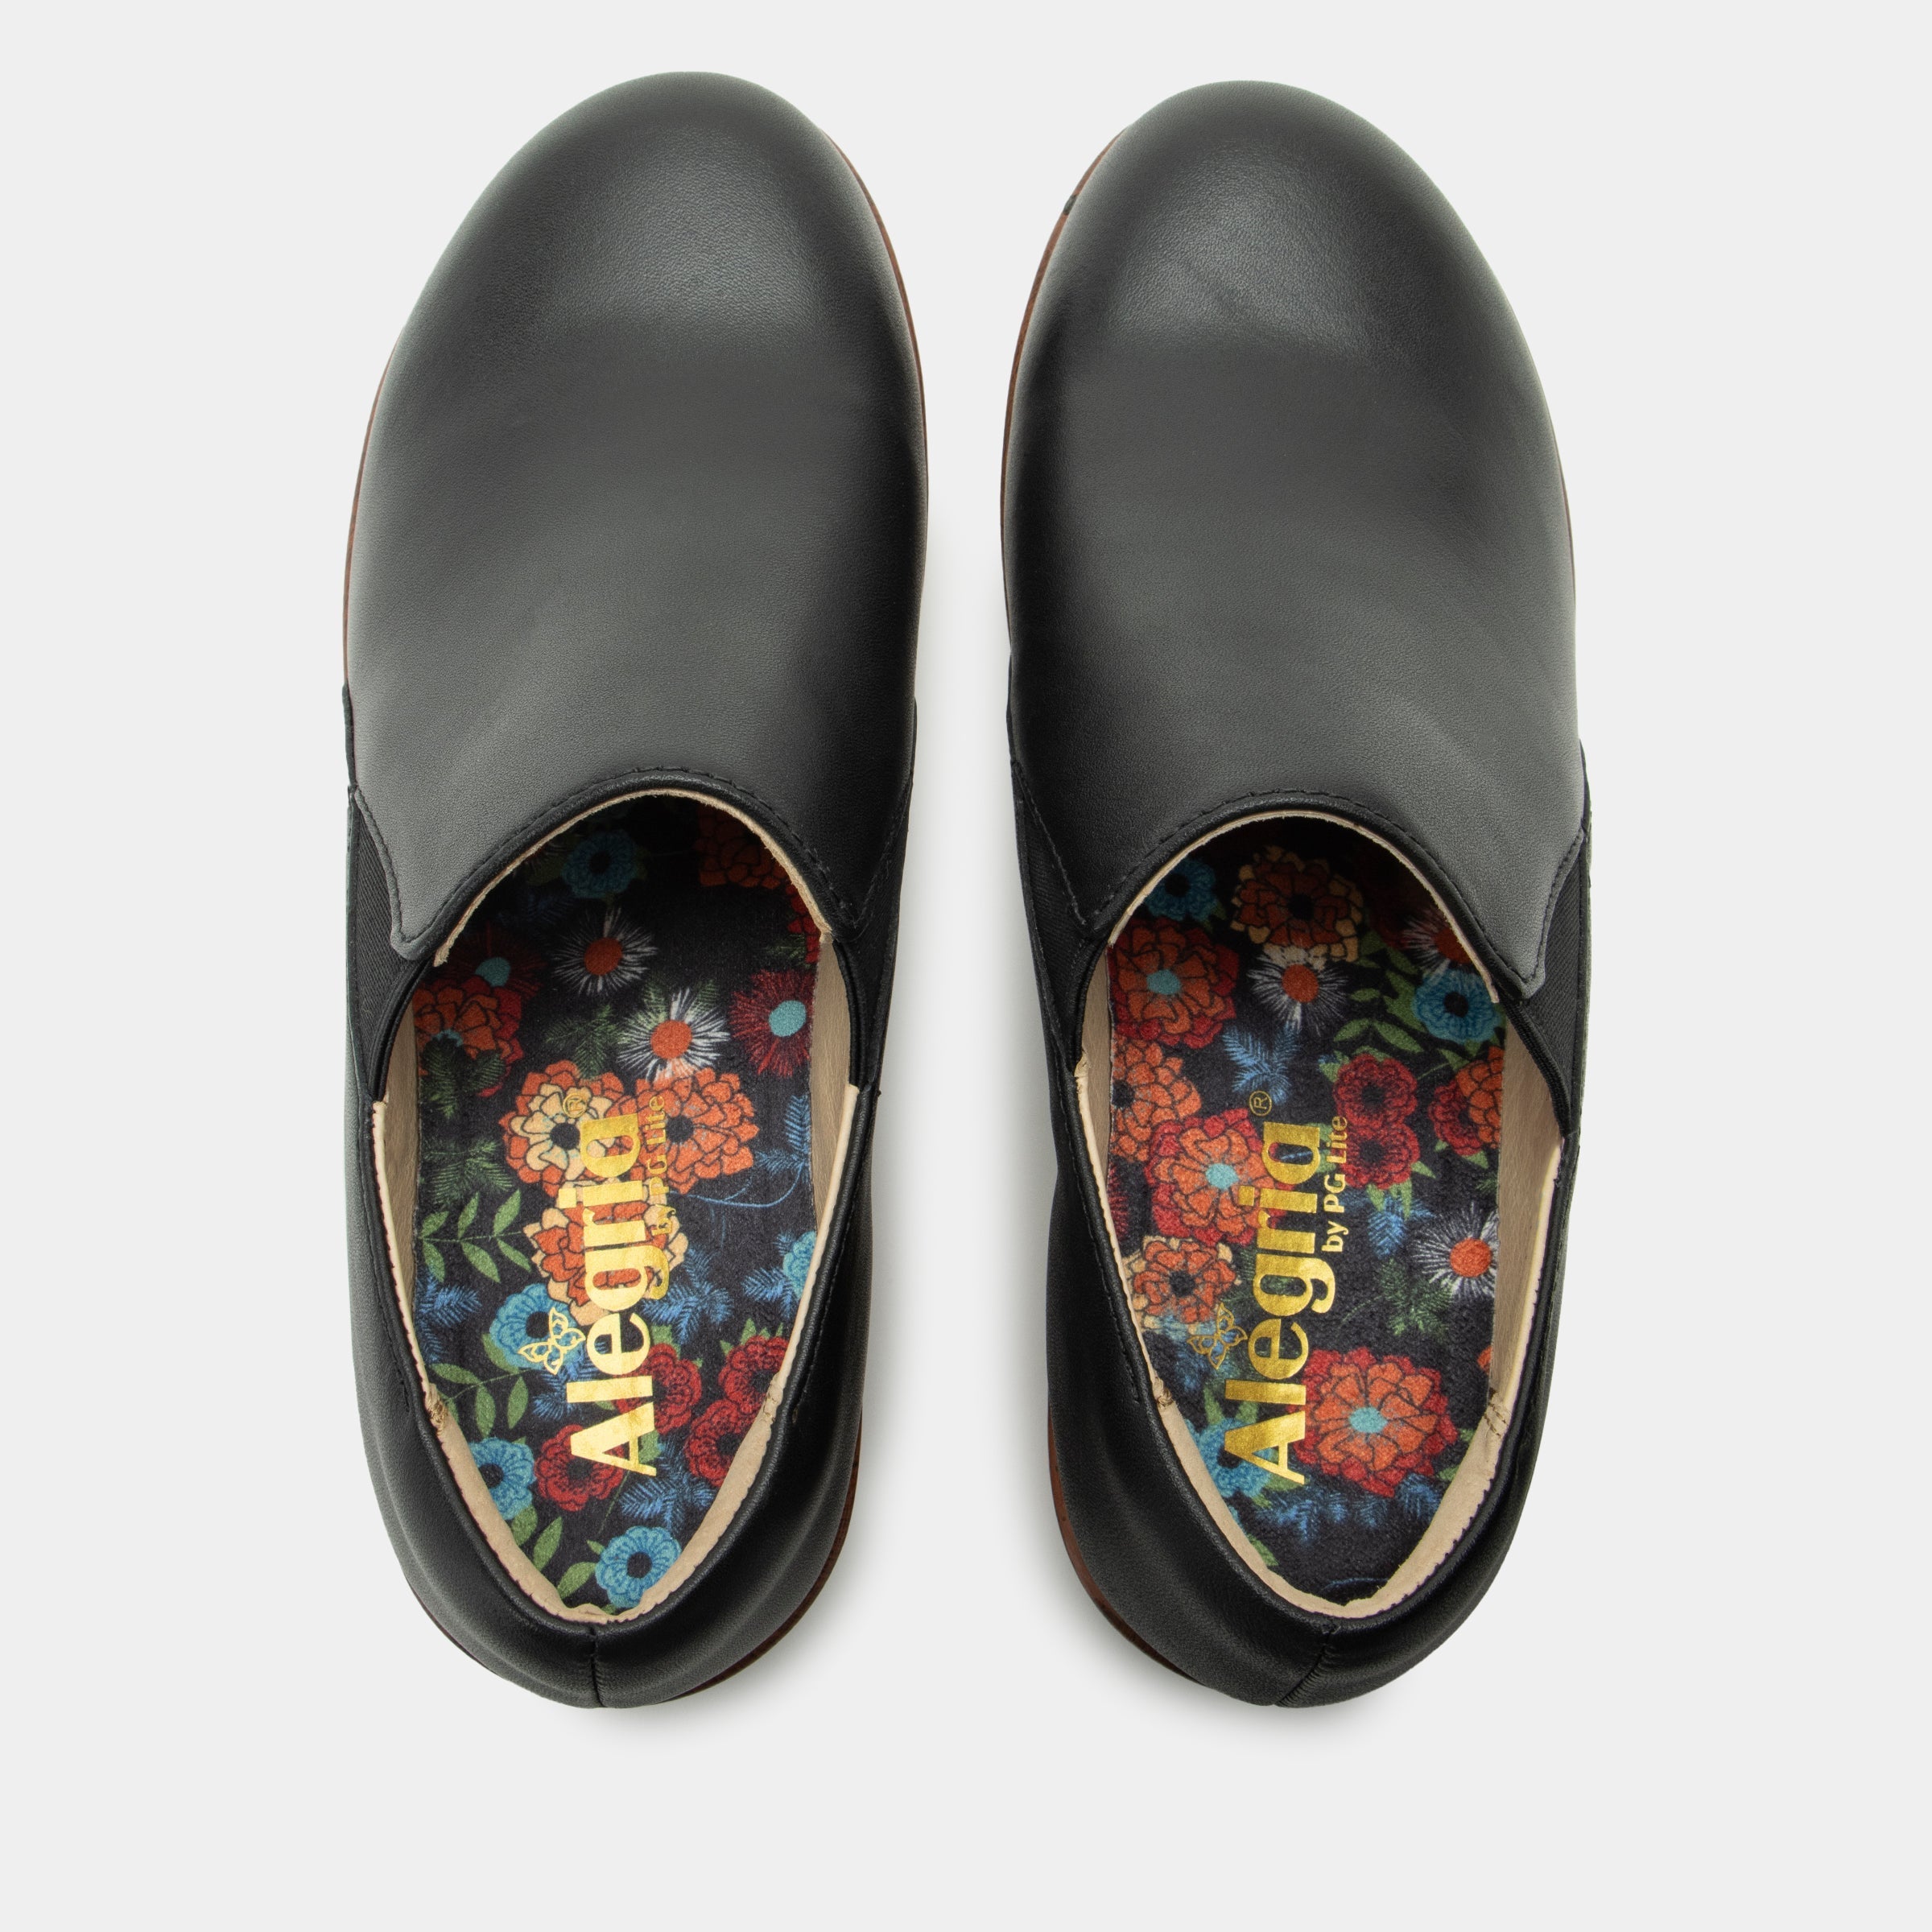 Dr martens louis gusset slip on + FREE SHIPPING